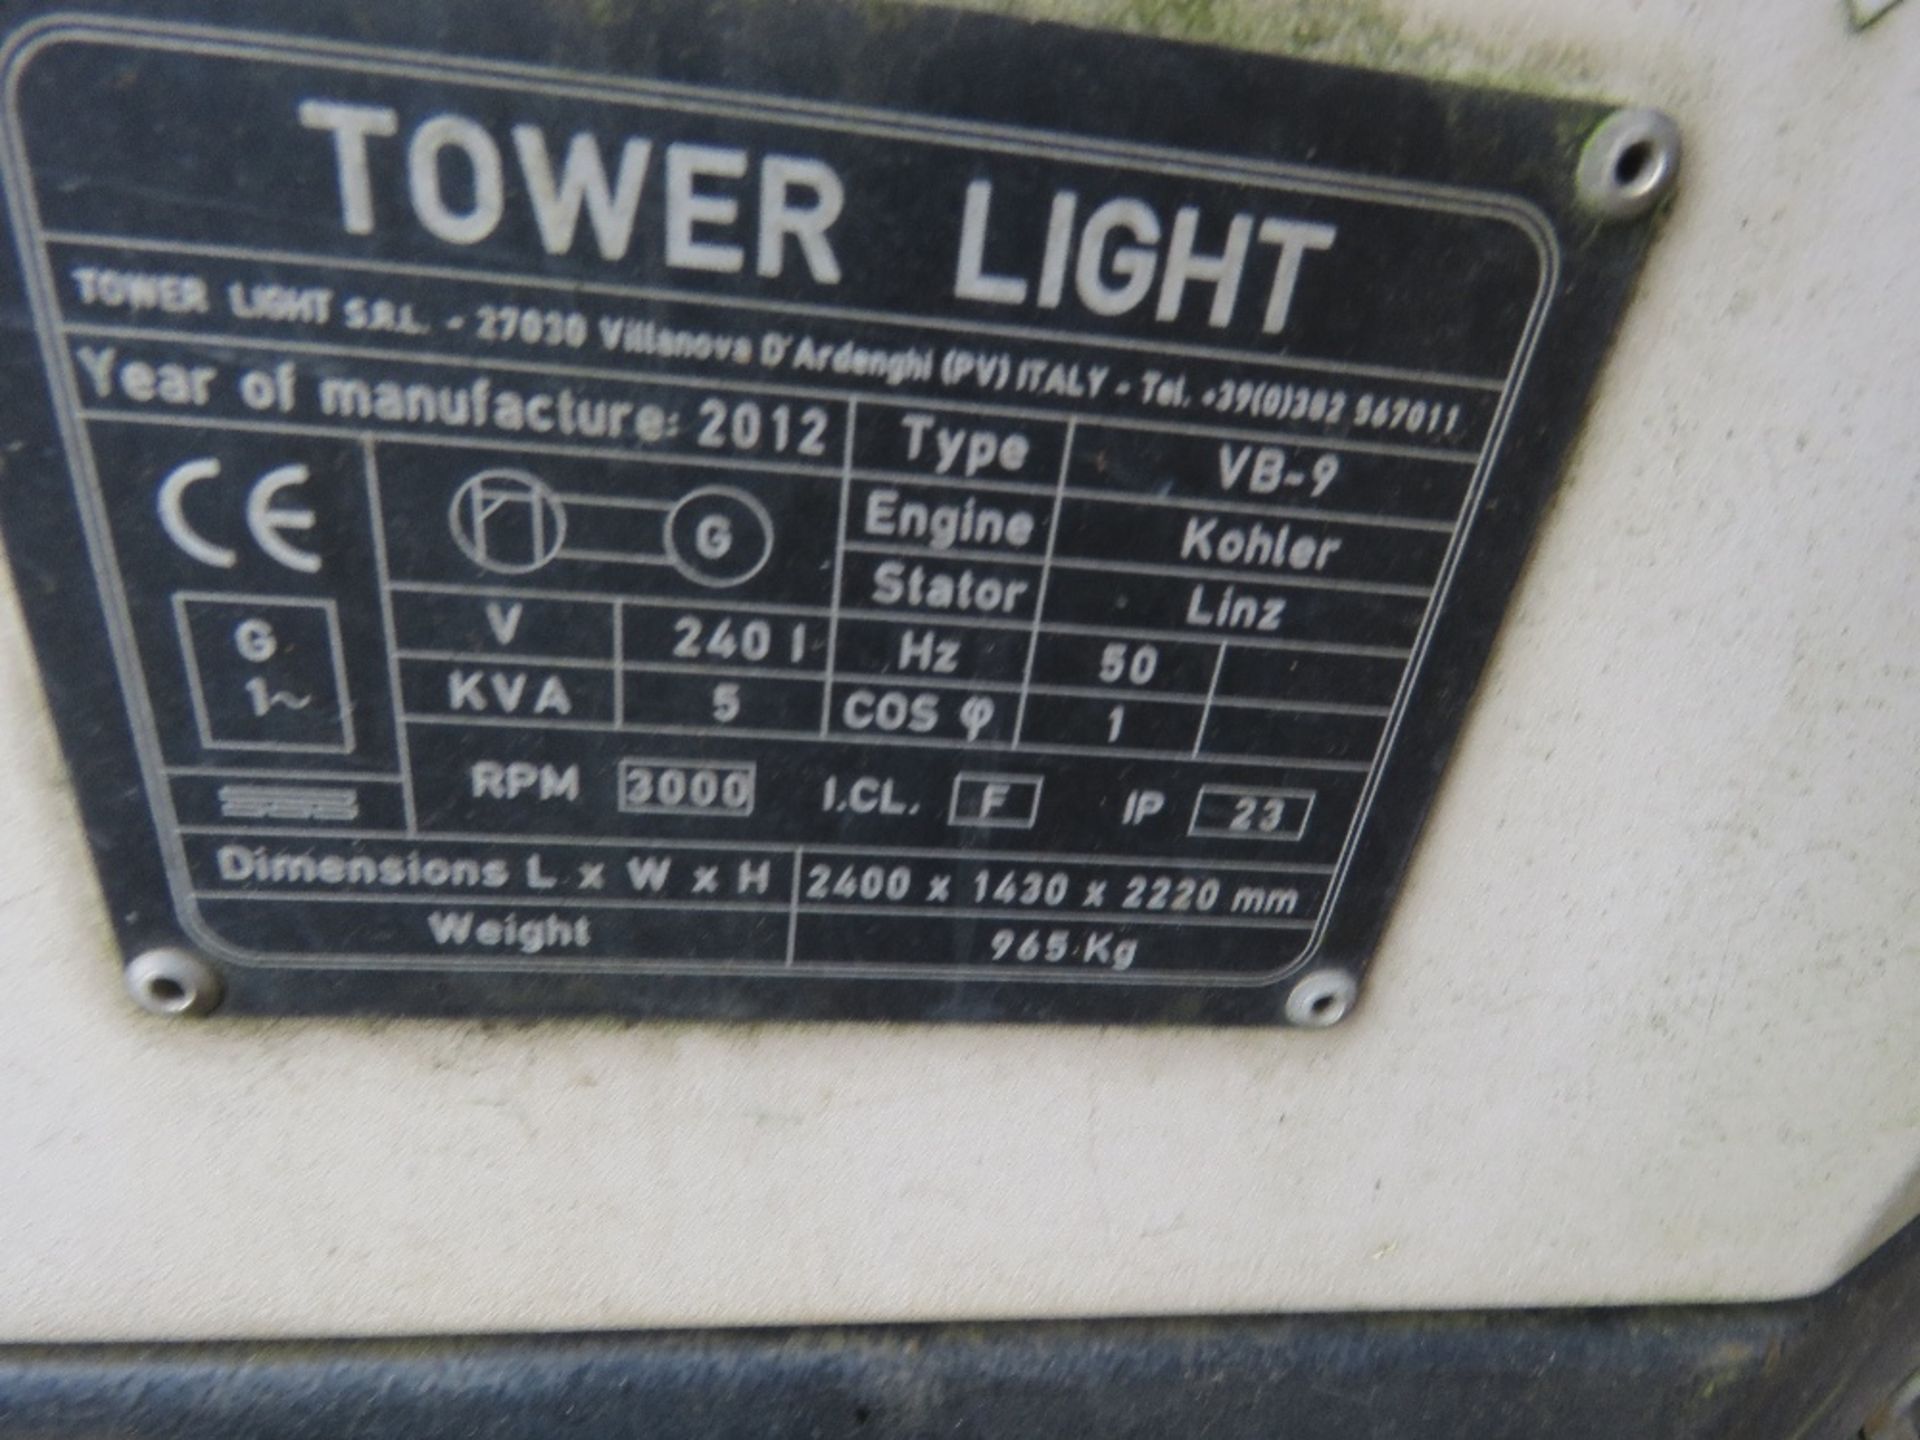 VB9 LIGHTING TOWER, ENGINE ETC MISSING AS SHOWN IN THE IMAGES. SOLD AS INCOMPLETE. - Image 6 of 8